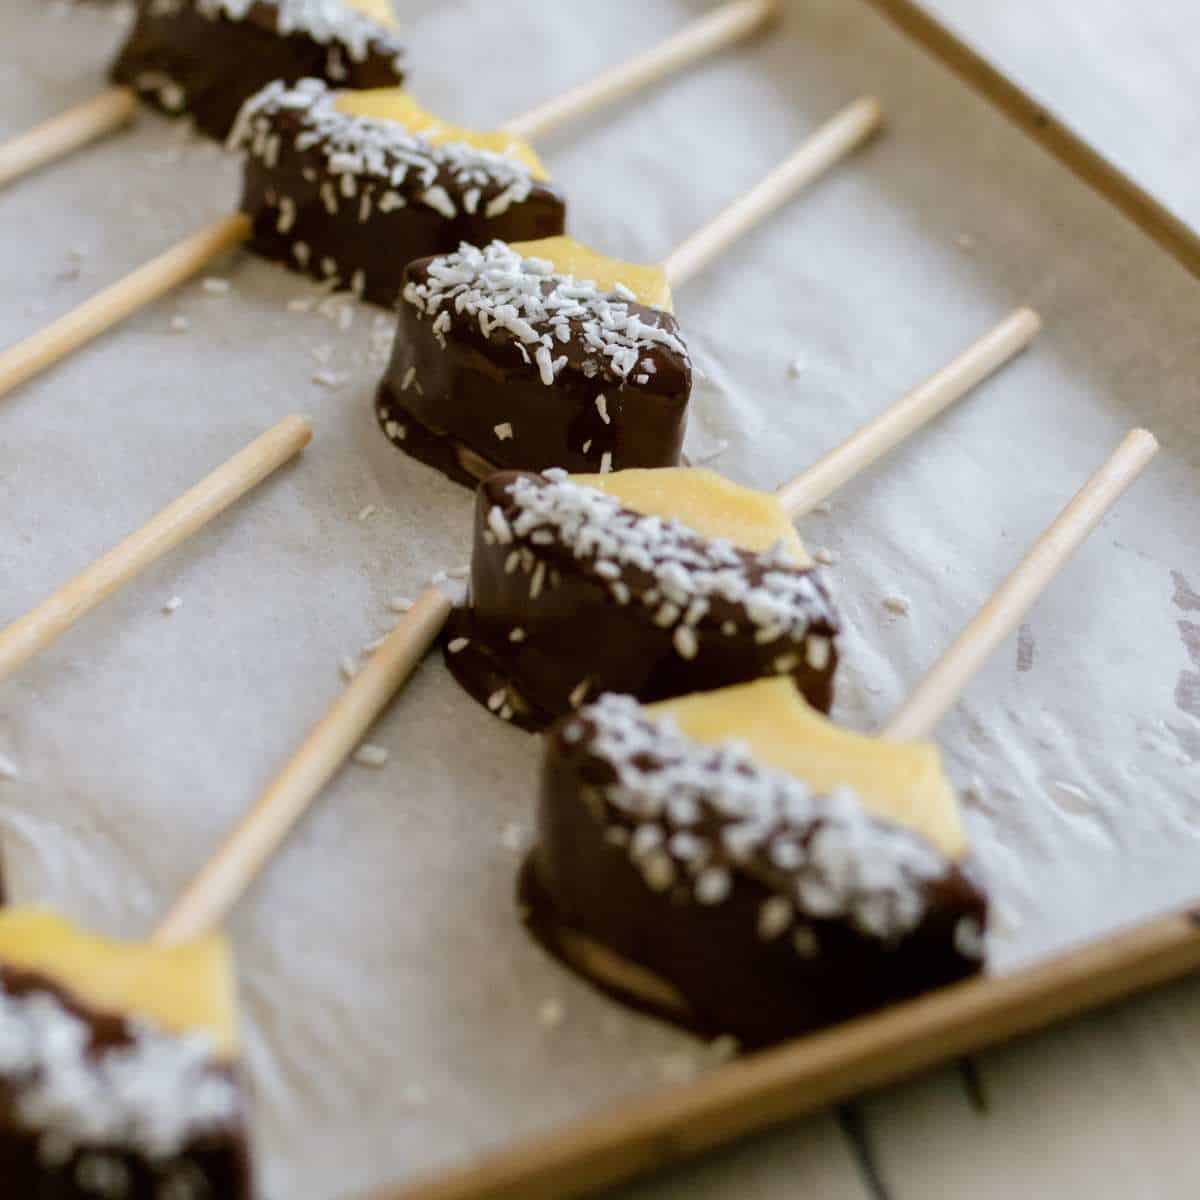 Recipe steps 4, place the chocolate-dipped pineapple on a baking sheet with parchment paper on it and sprinkle shredded coconut on top.